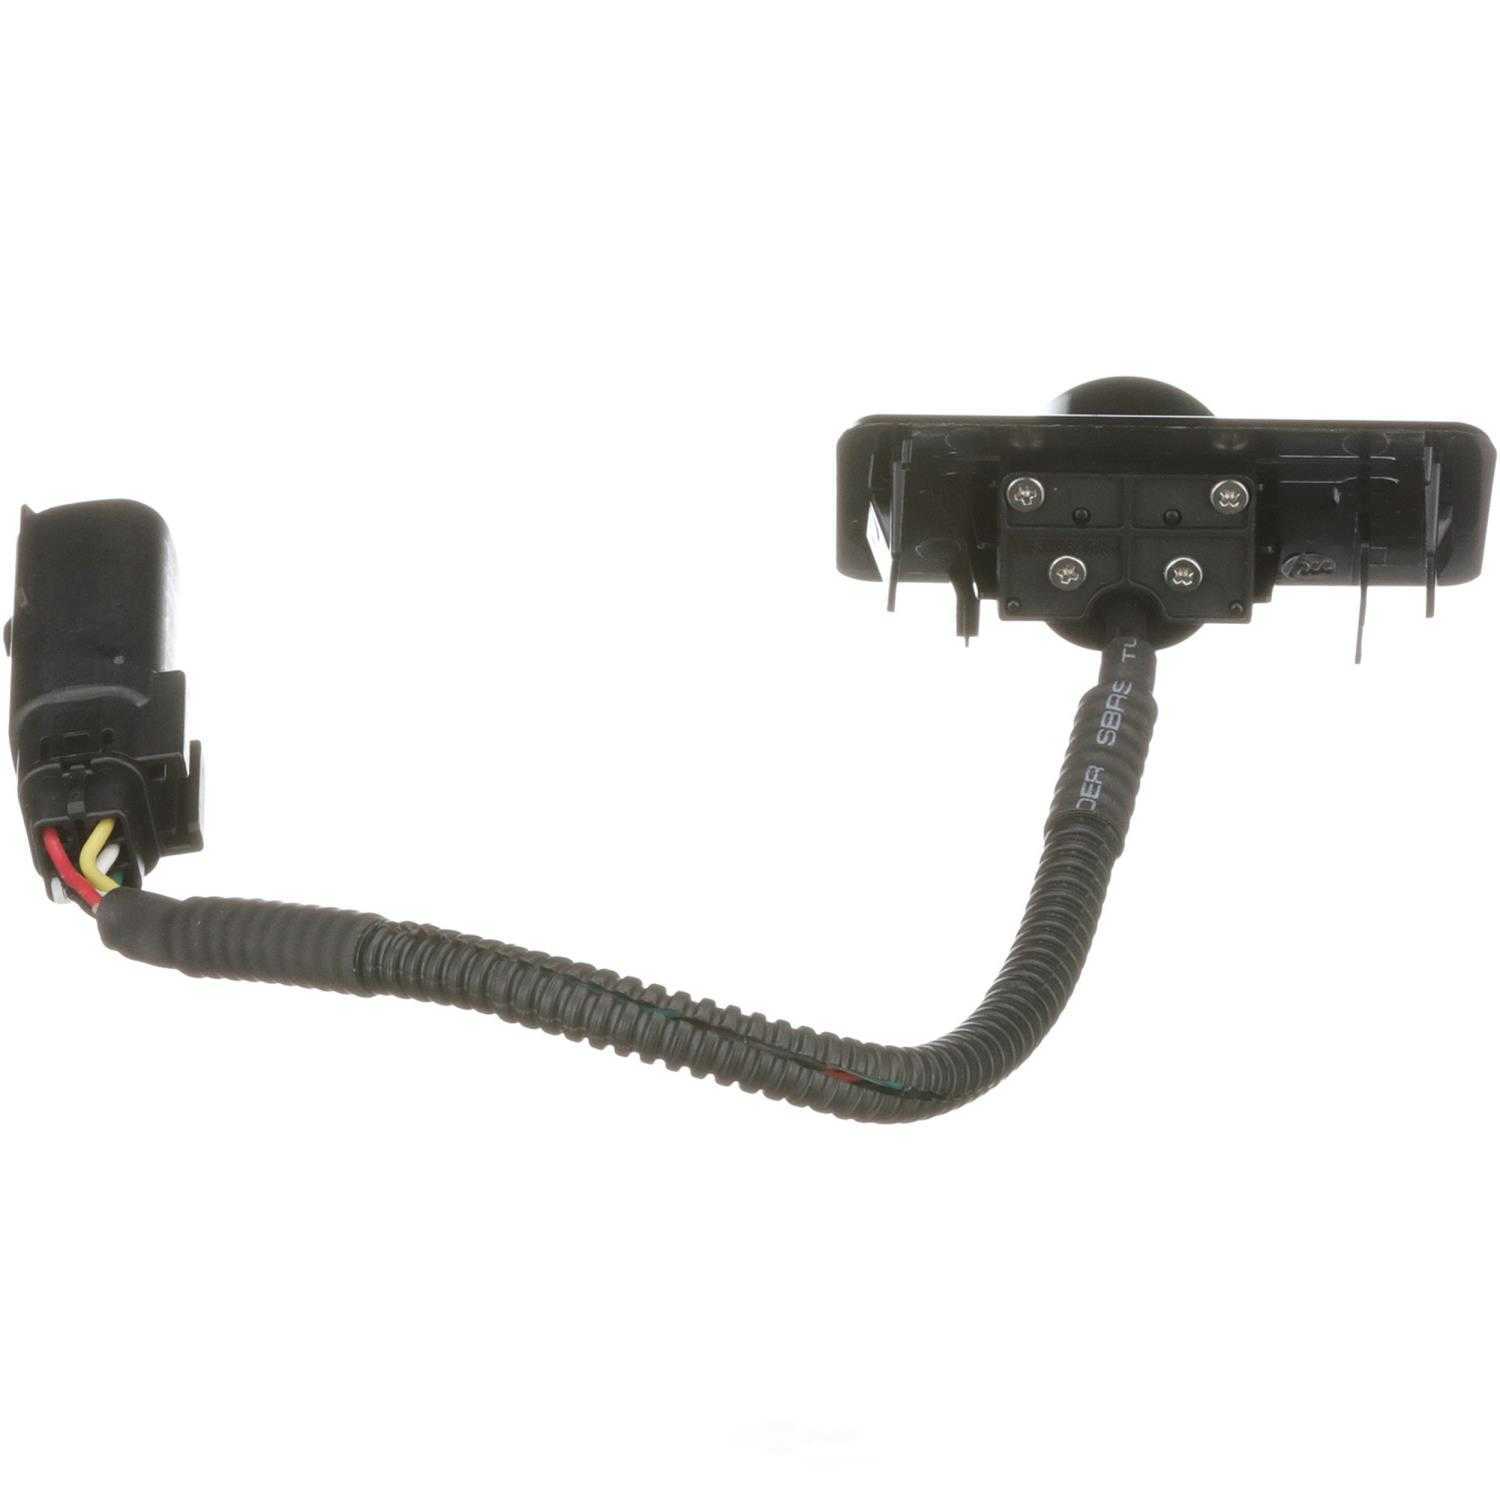 STANDARD MOTOR PRODUCTS - Park Assist Camera - STA PAC155